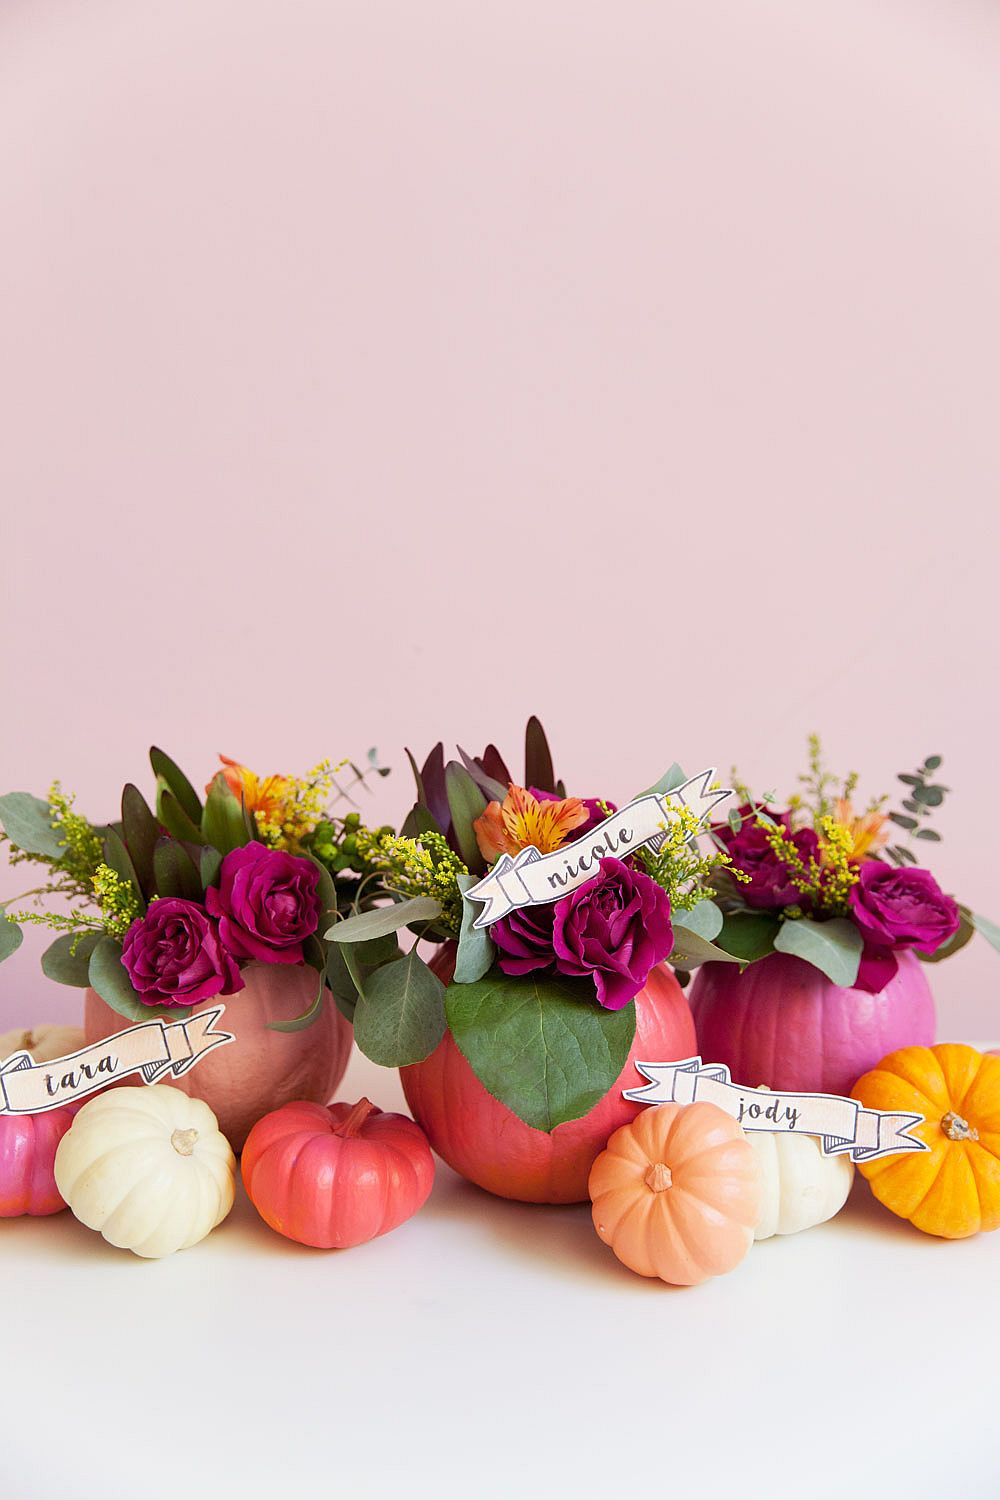 Colorful pumpkins and flowers brought together beautifully for fall charm